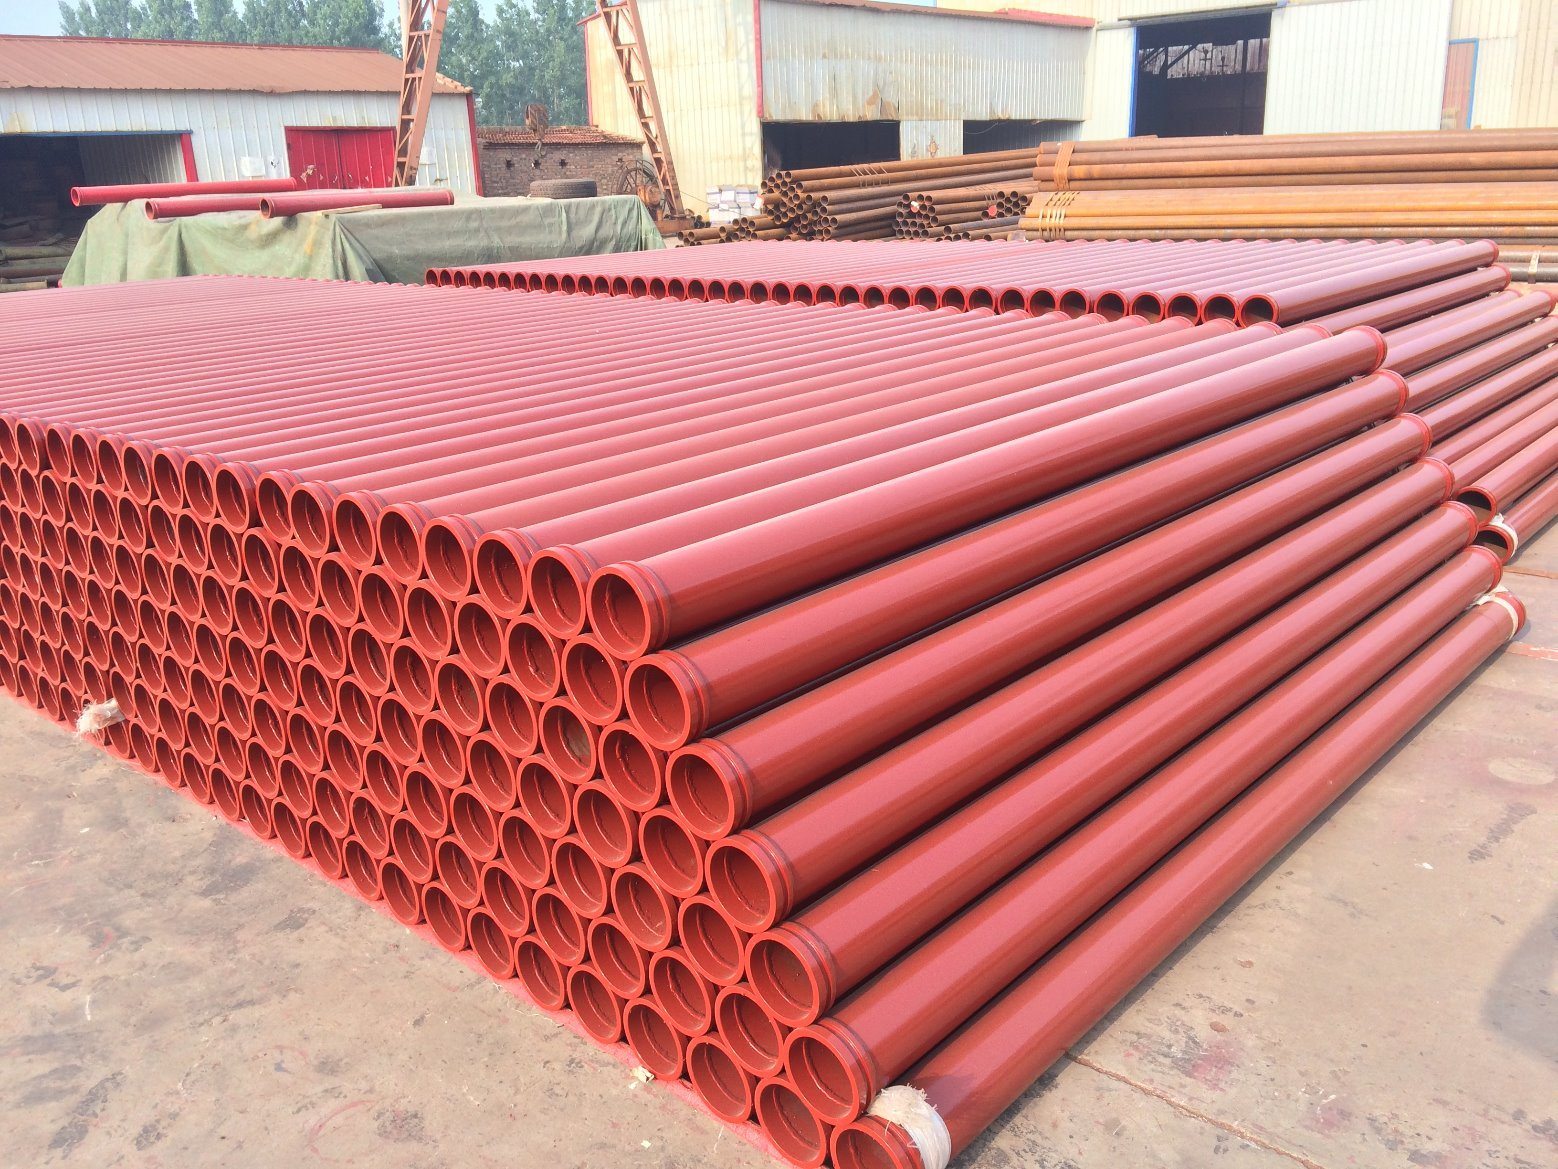 Twin Wall Boom Pipe for Concrete Pump Works in Covid19 Time